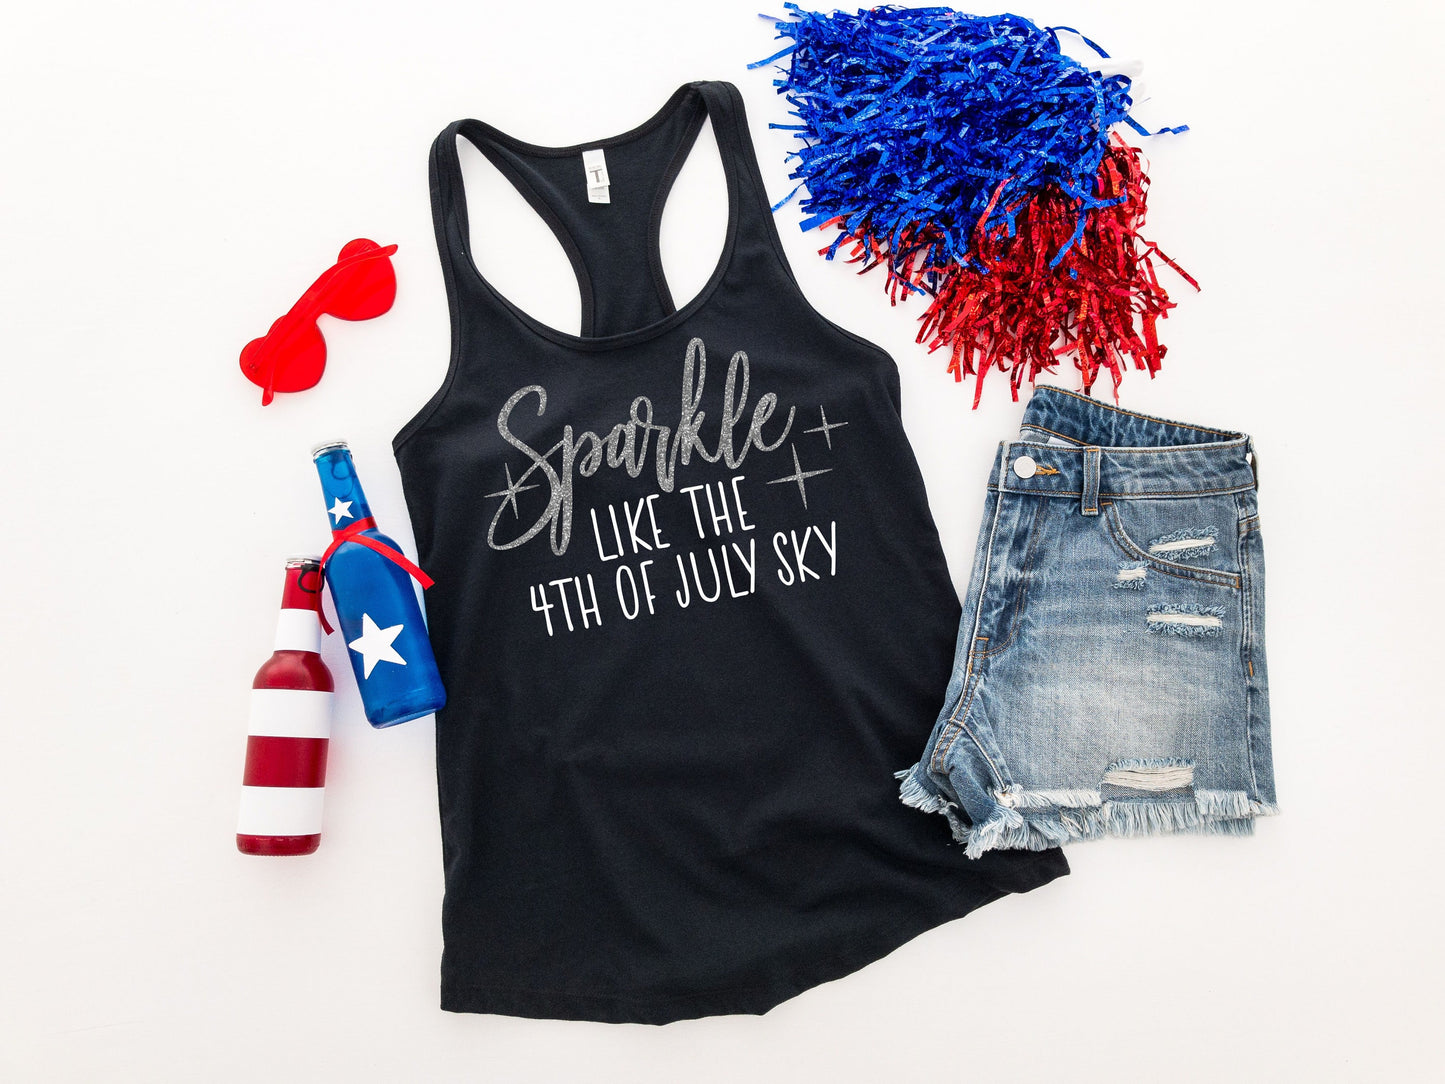 Sparkle like the 4th of July Sky patriotic racerback tank • Women's 4th of July tank top